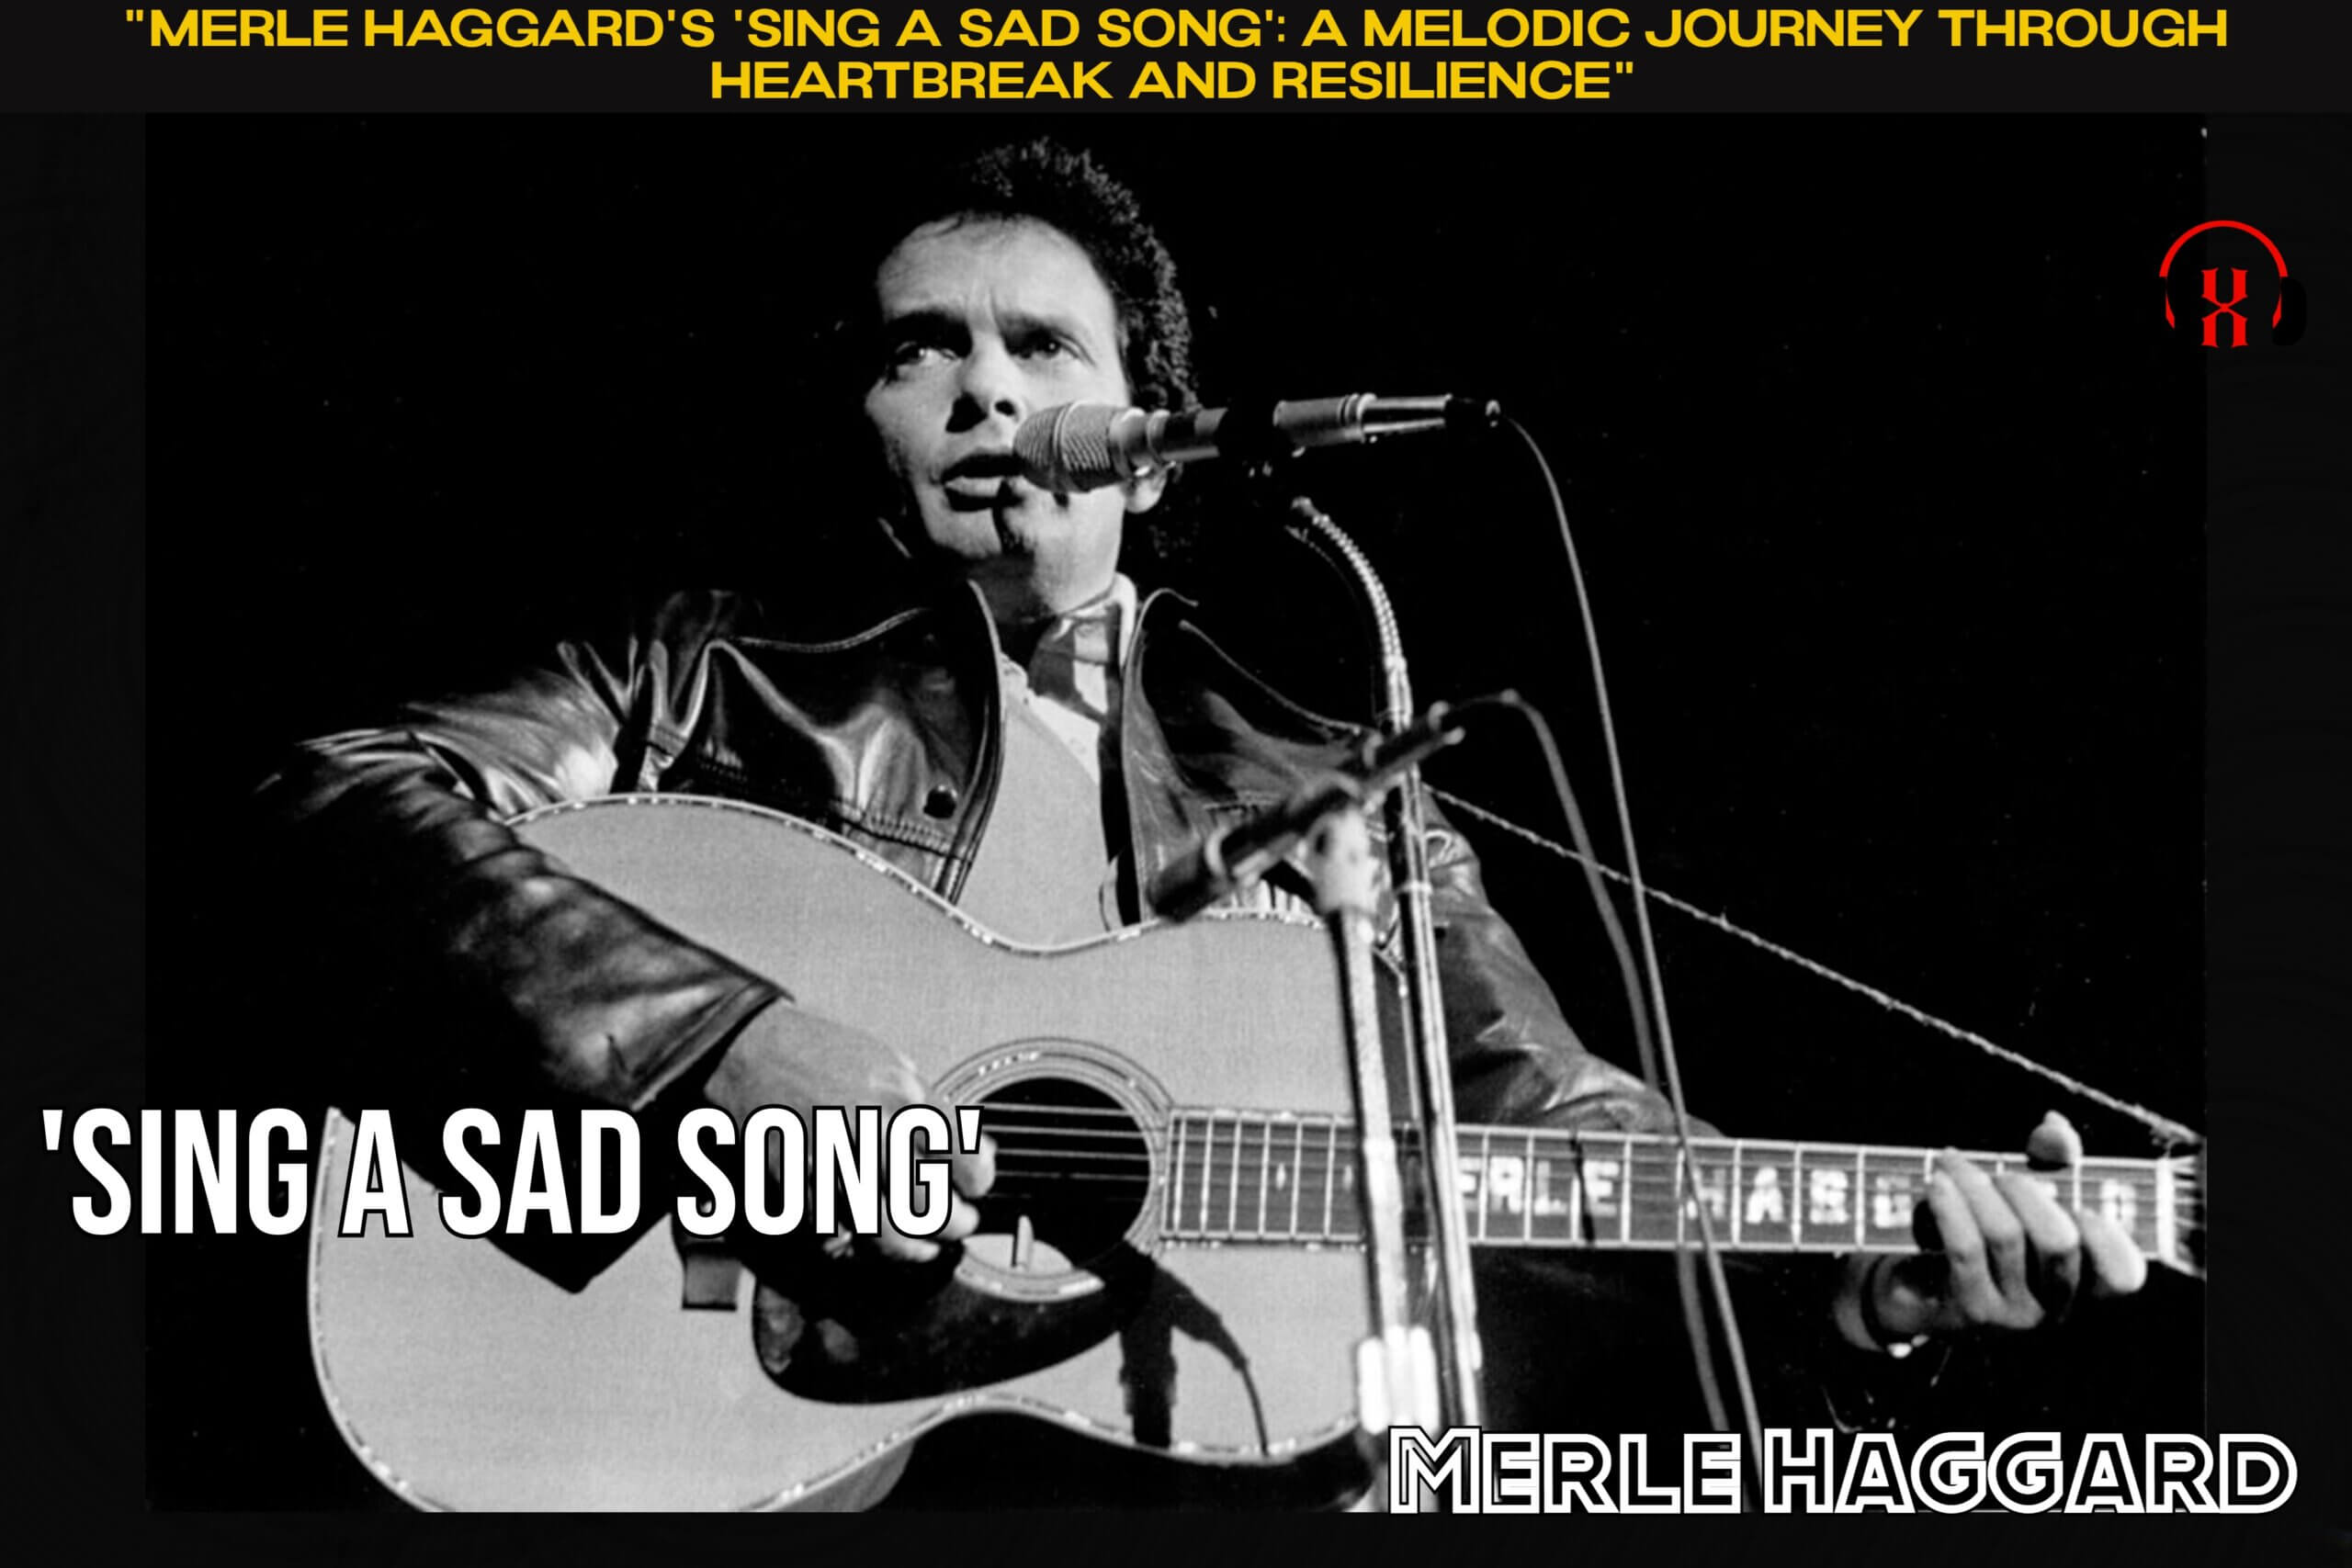 “Merle Haggard’s ‘Sing a Sad Song’: A Melodic Journey through Heartbreak and Resilience”